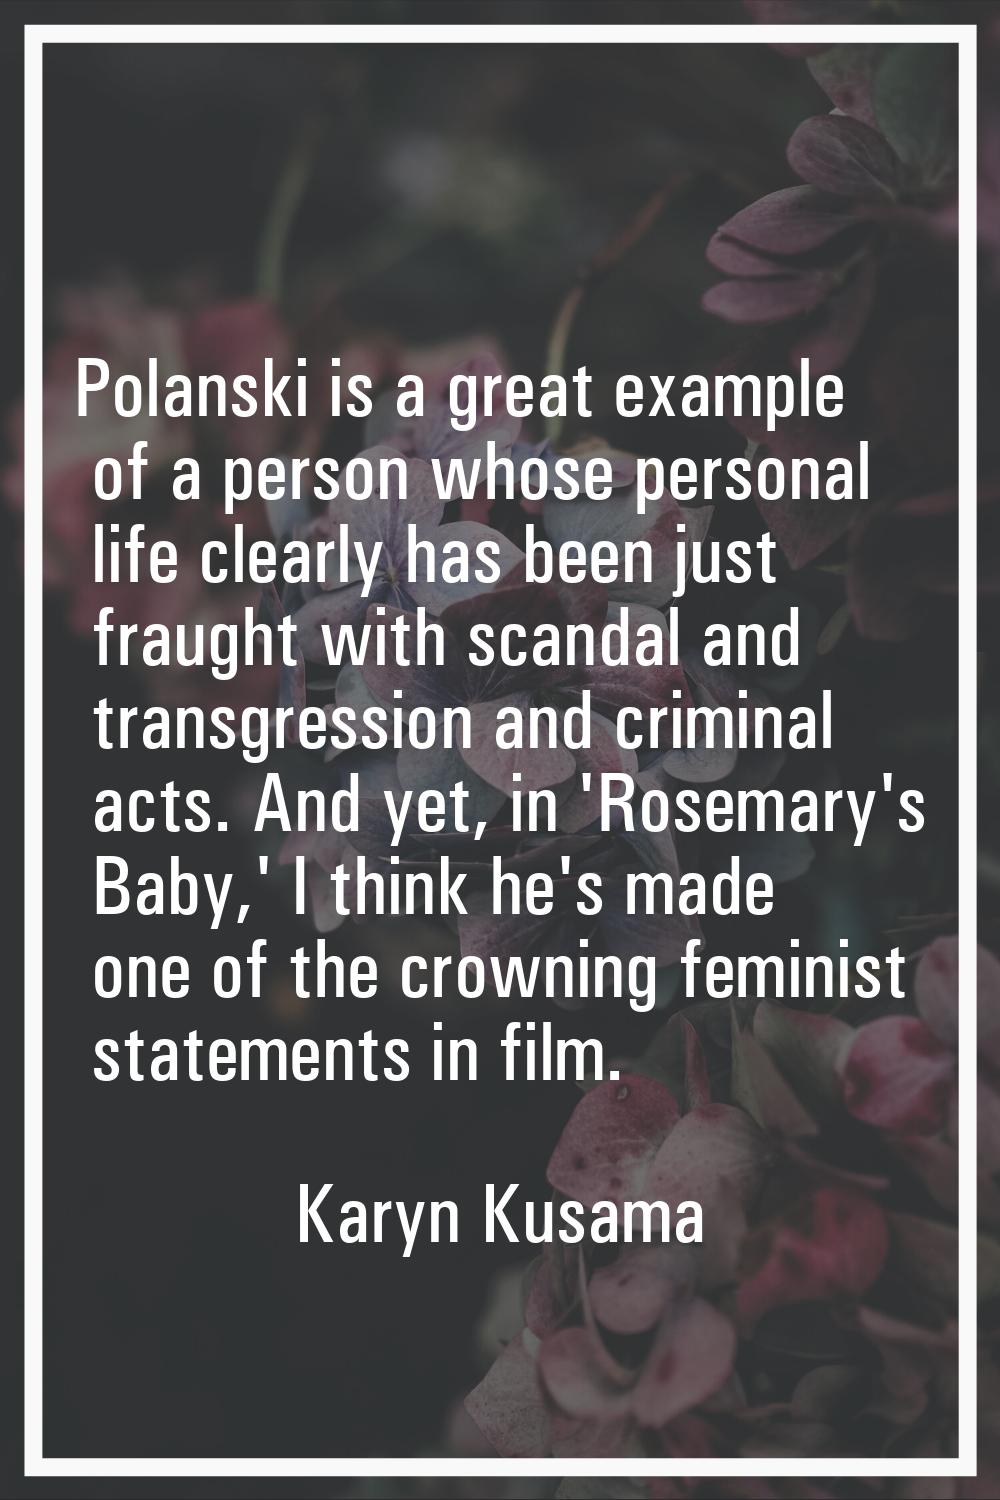 Polanski is a great example of a person whose personal life clearly has been just fraught with scan